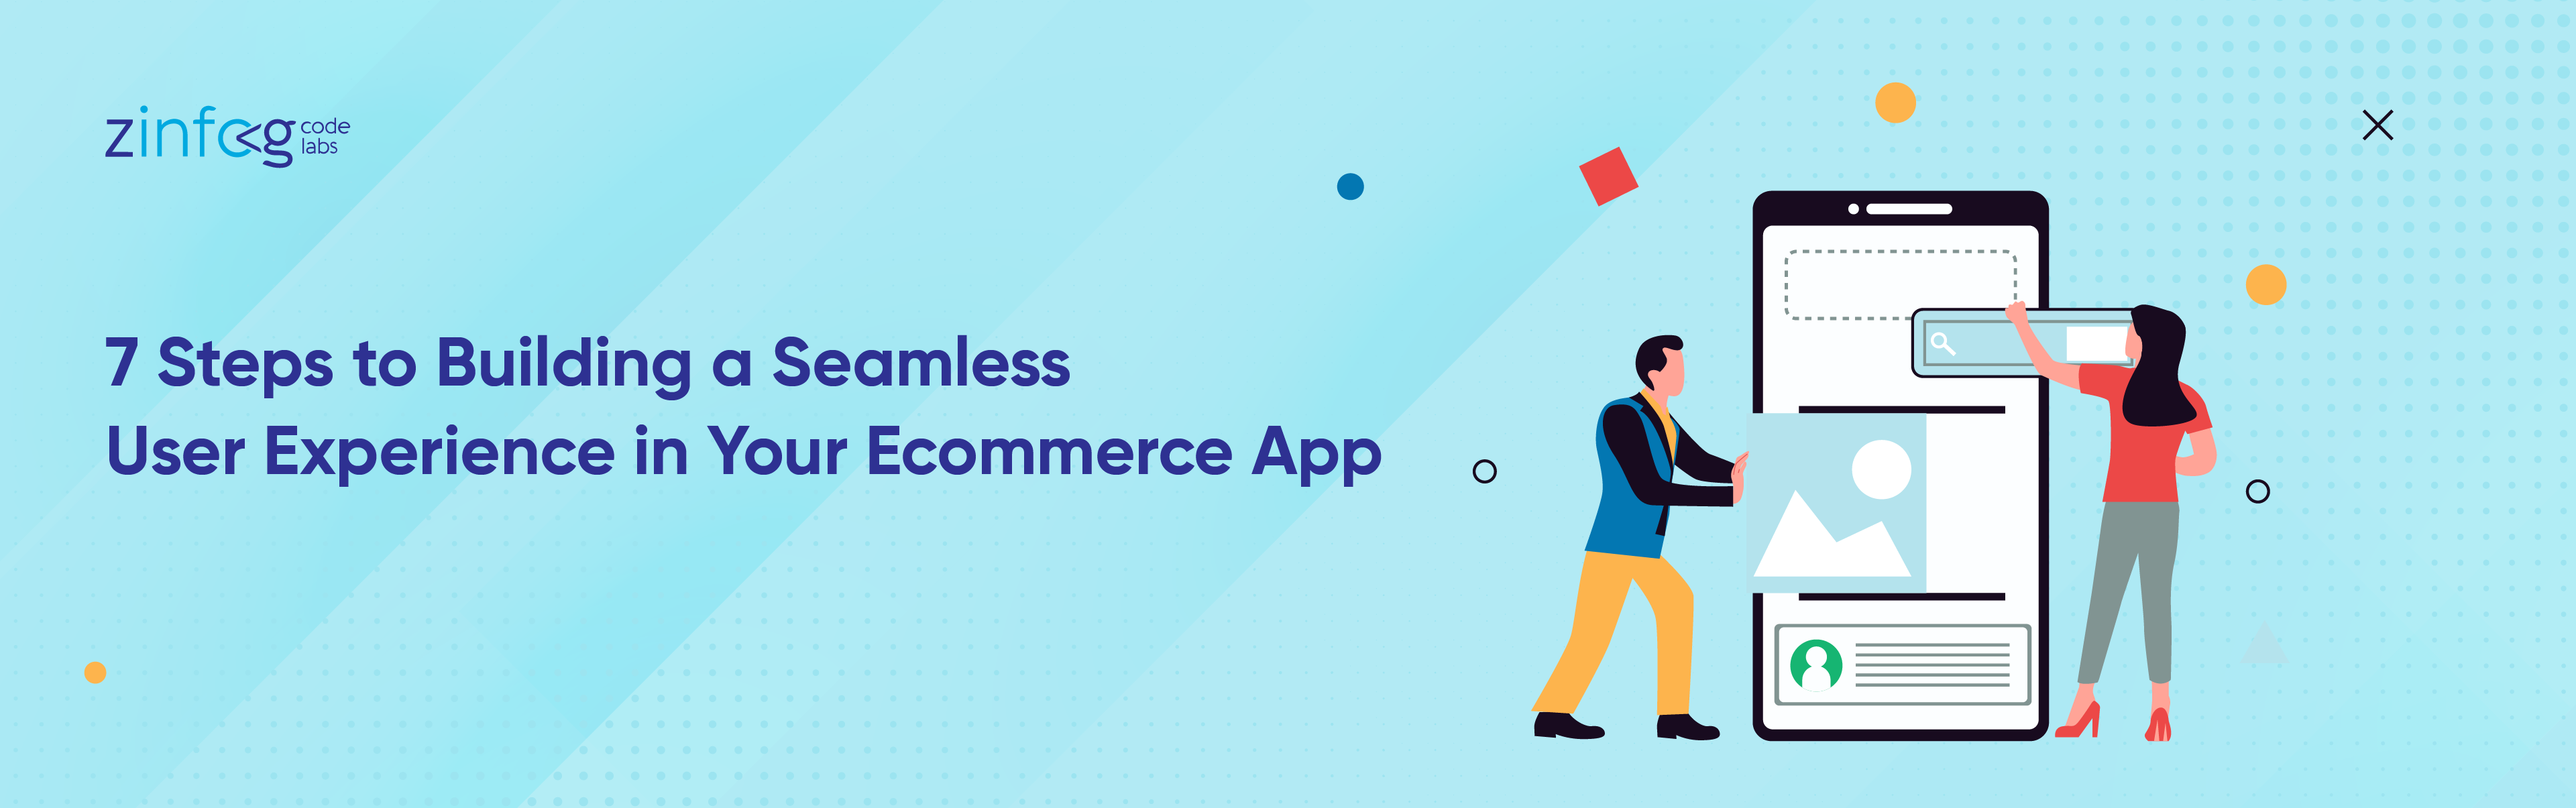 7-steps-to-building-a-seamless-user-experience-in-your-ecommerce-app.html